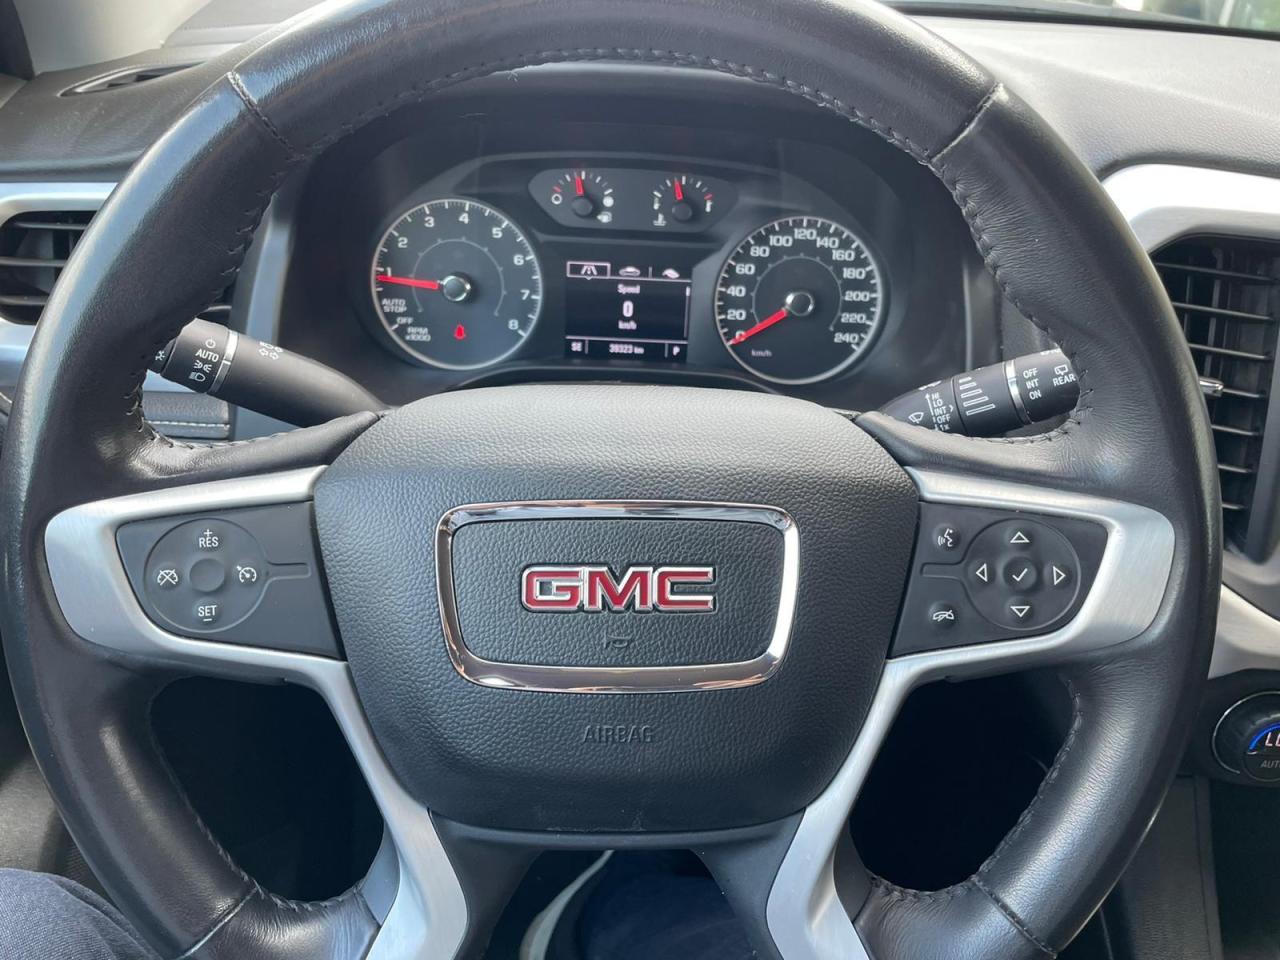 2019 GMC Acadia 7SEATS SLE LOW KM 4 CYLINDER GAS SAVER NO ACCIDENT - Photo #5